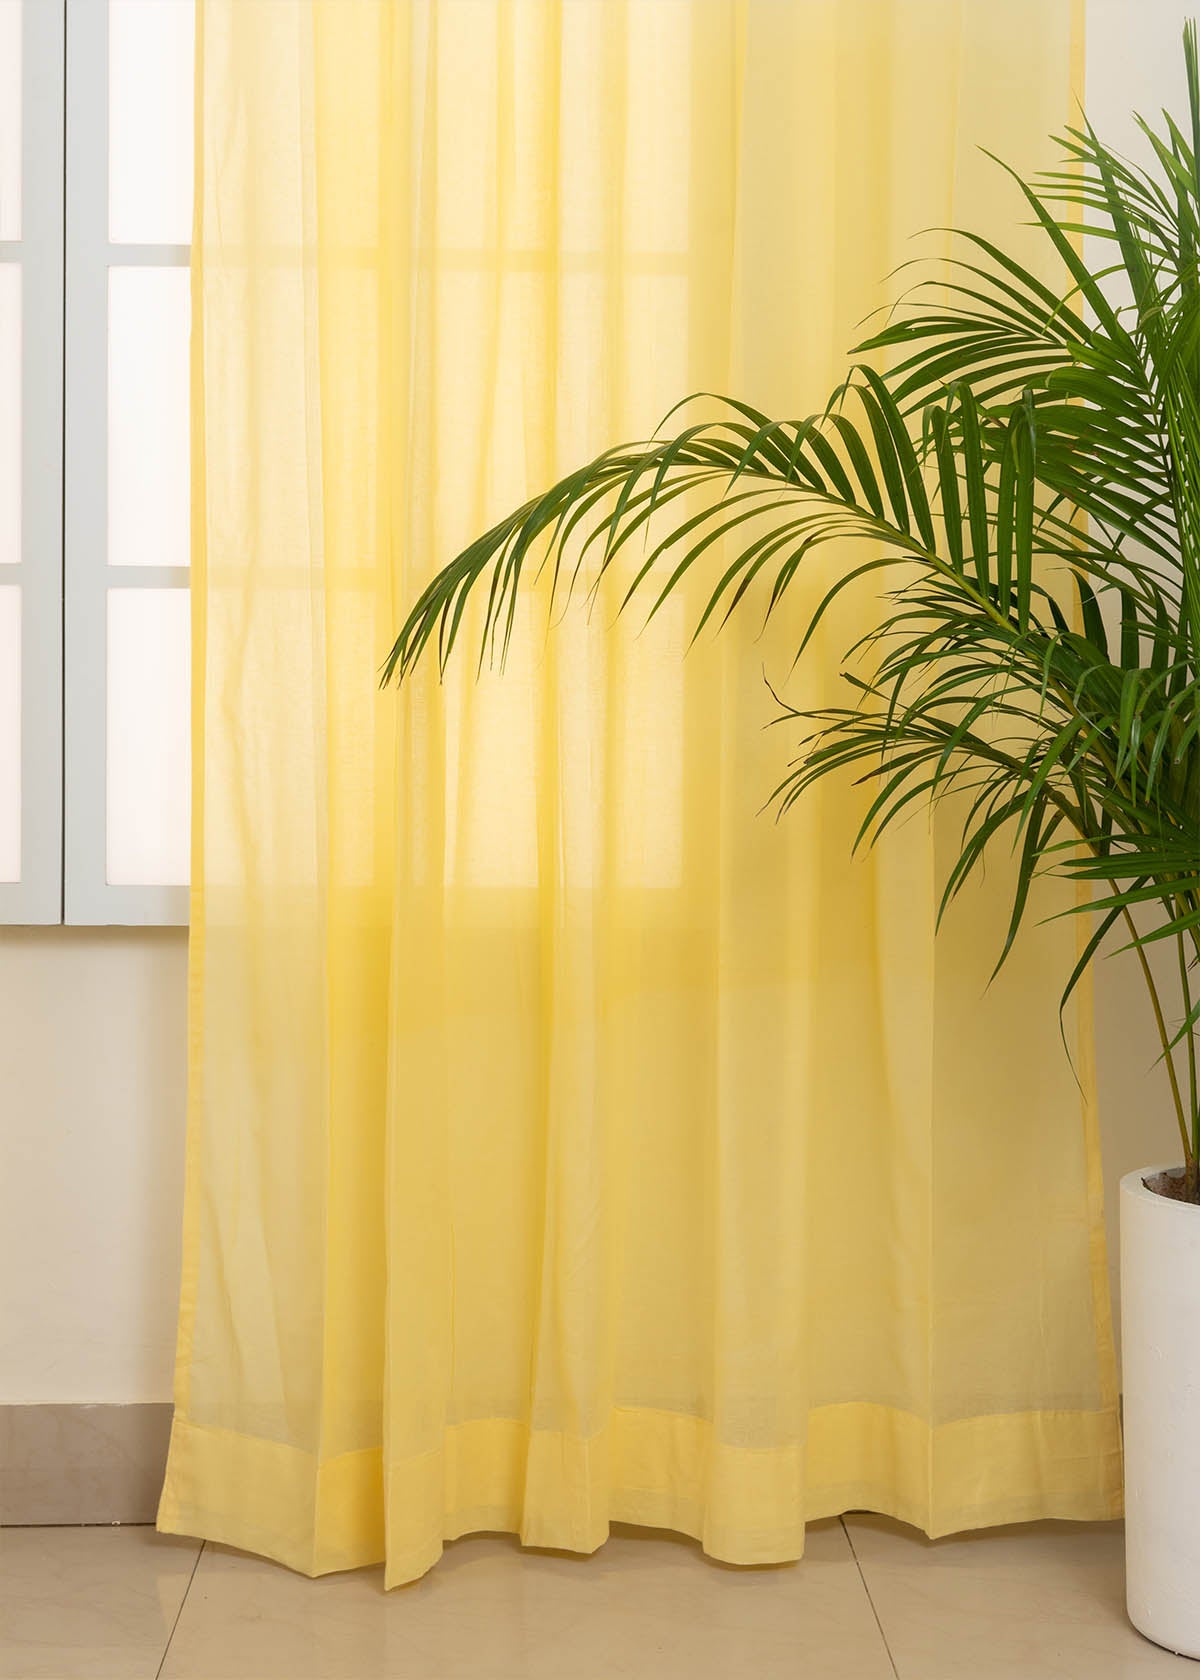 Solid Pale Yellow sheer 100% Customizable Cotton plain curtain for Living room & bedroom - Light filtering